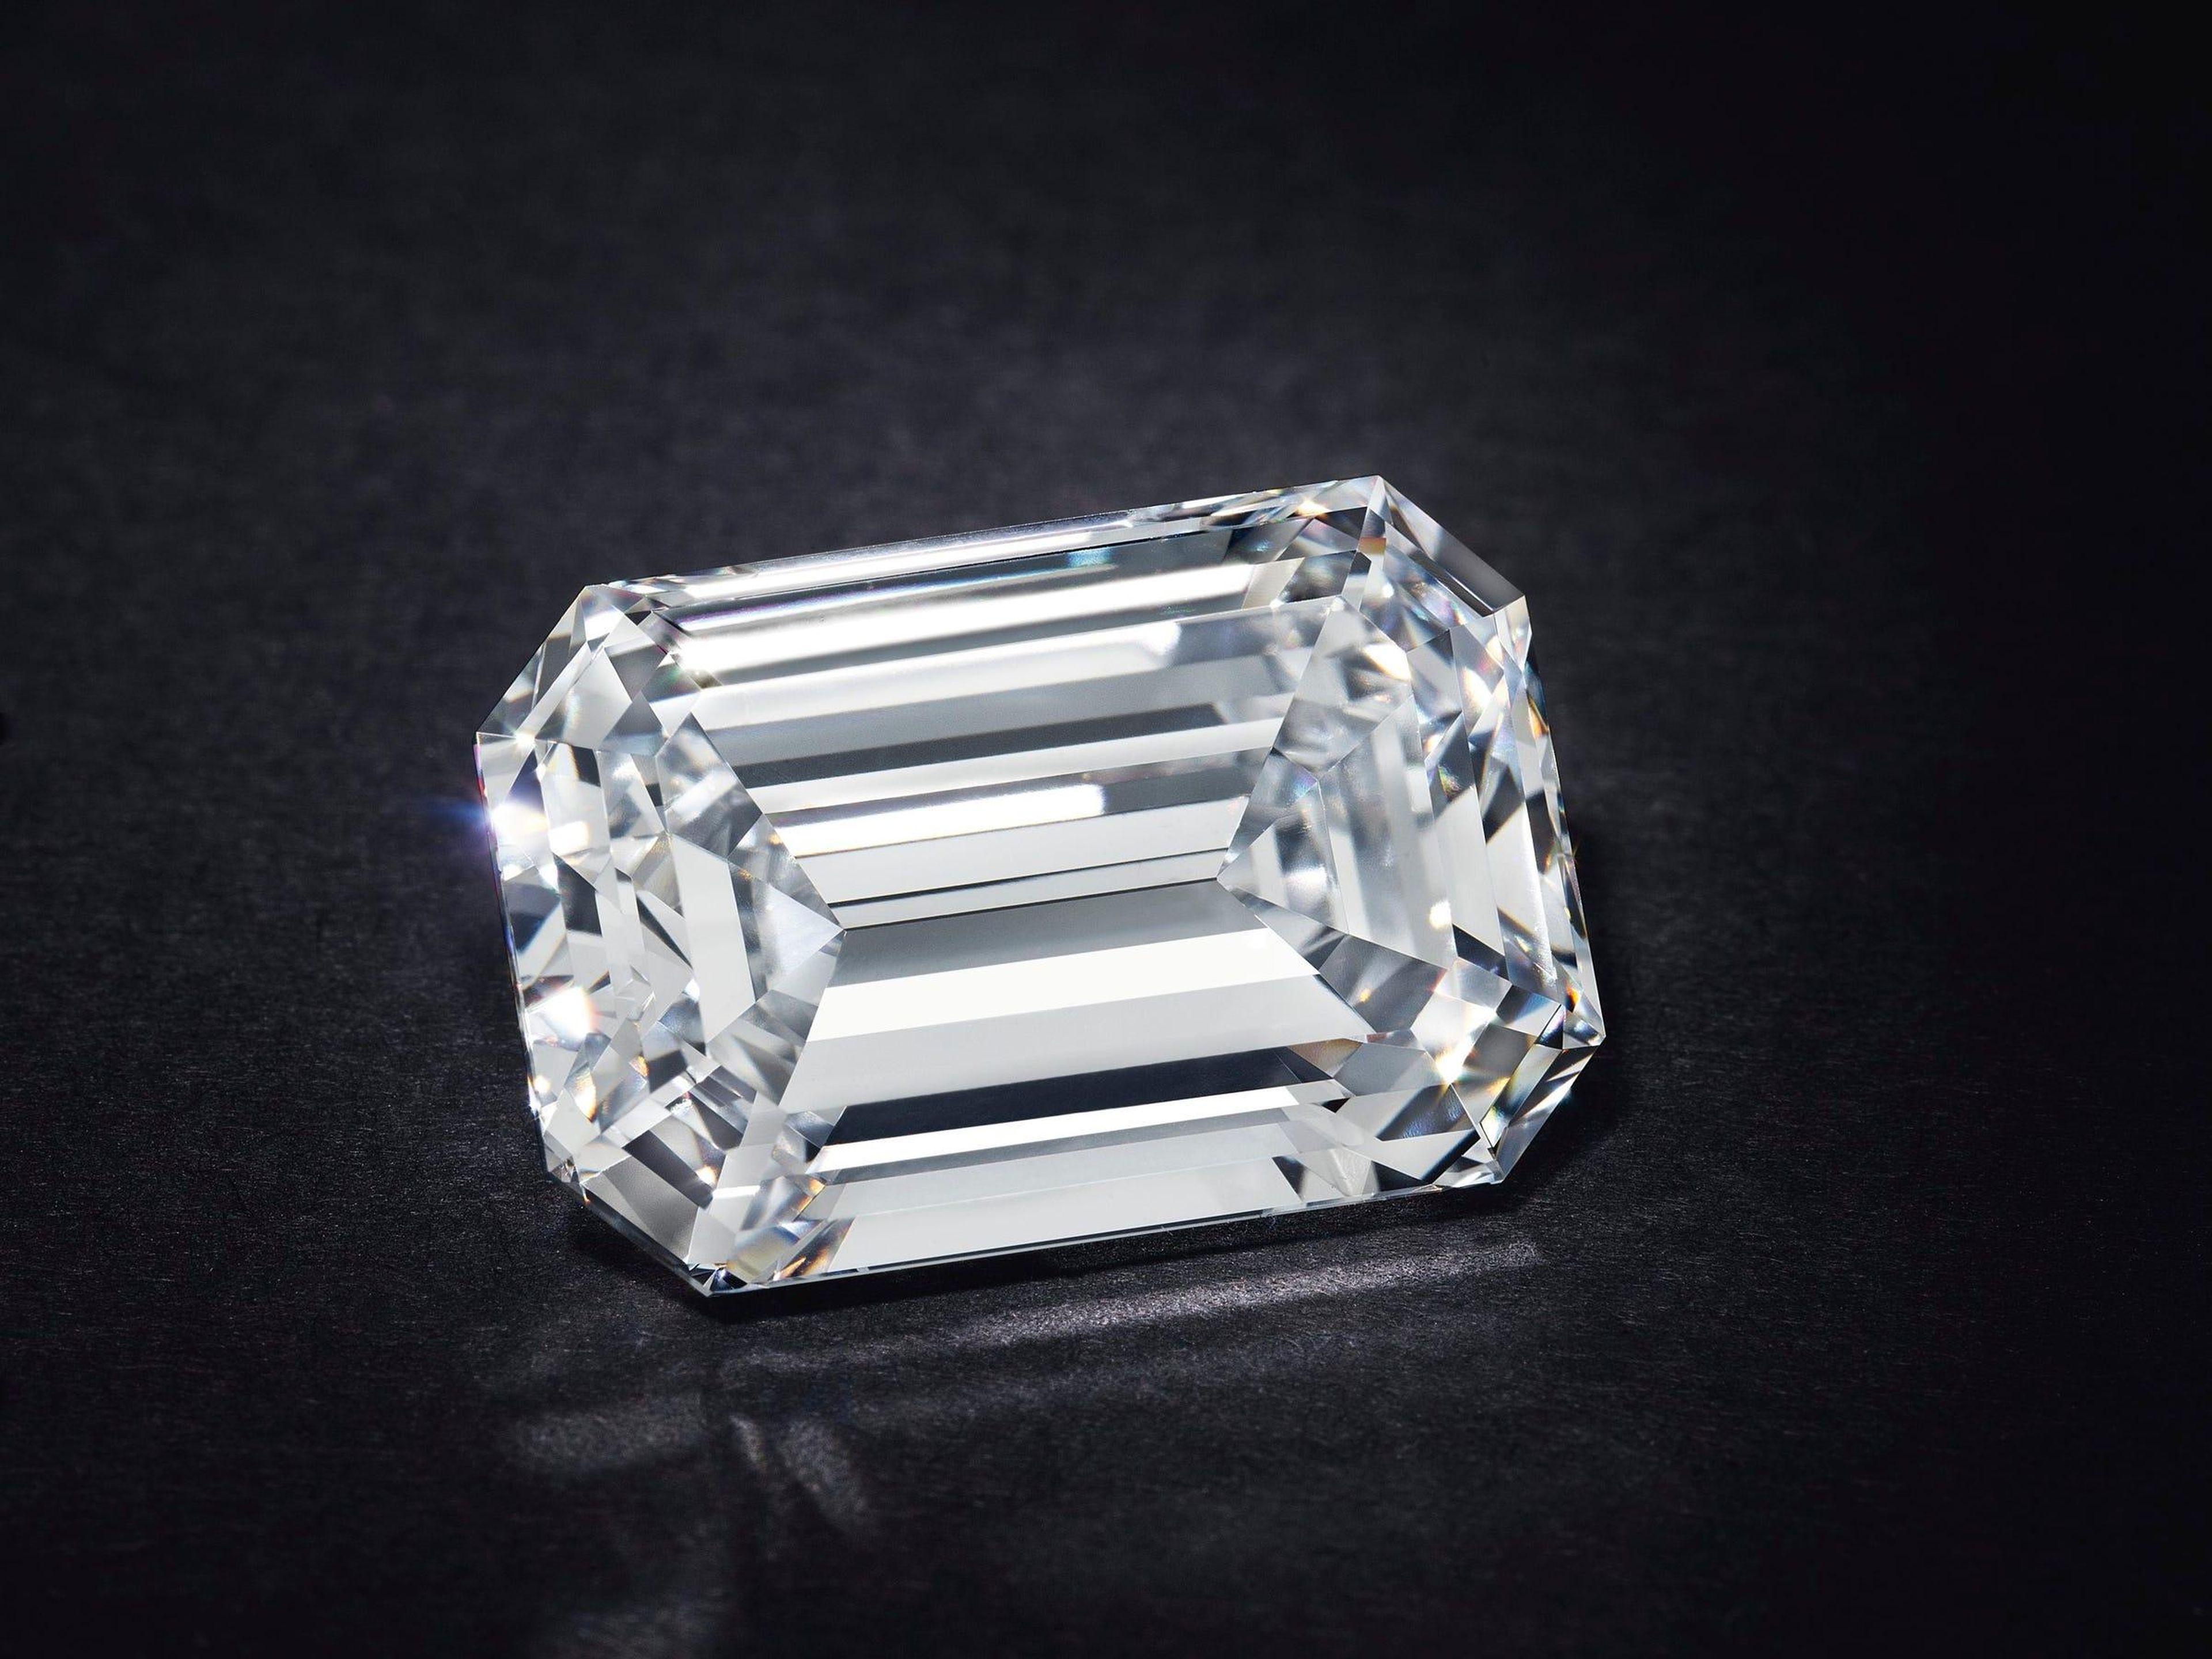 A 28-carat diamond just became the most expensive jewel ever auctioned online after selling for over $2.1 million